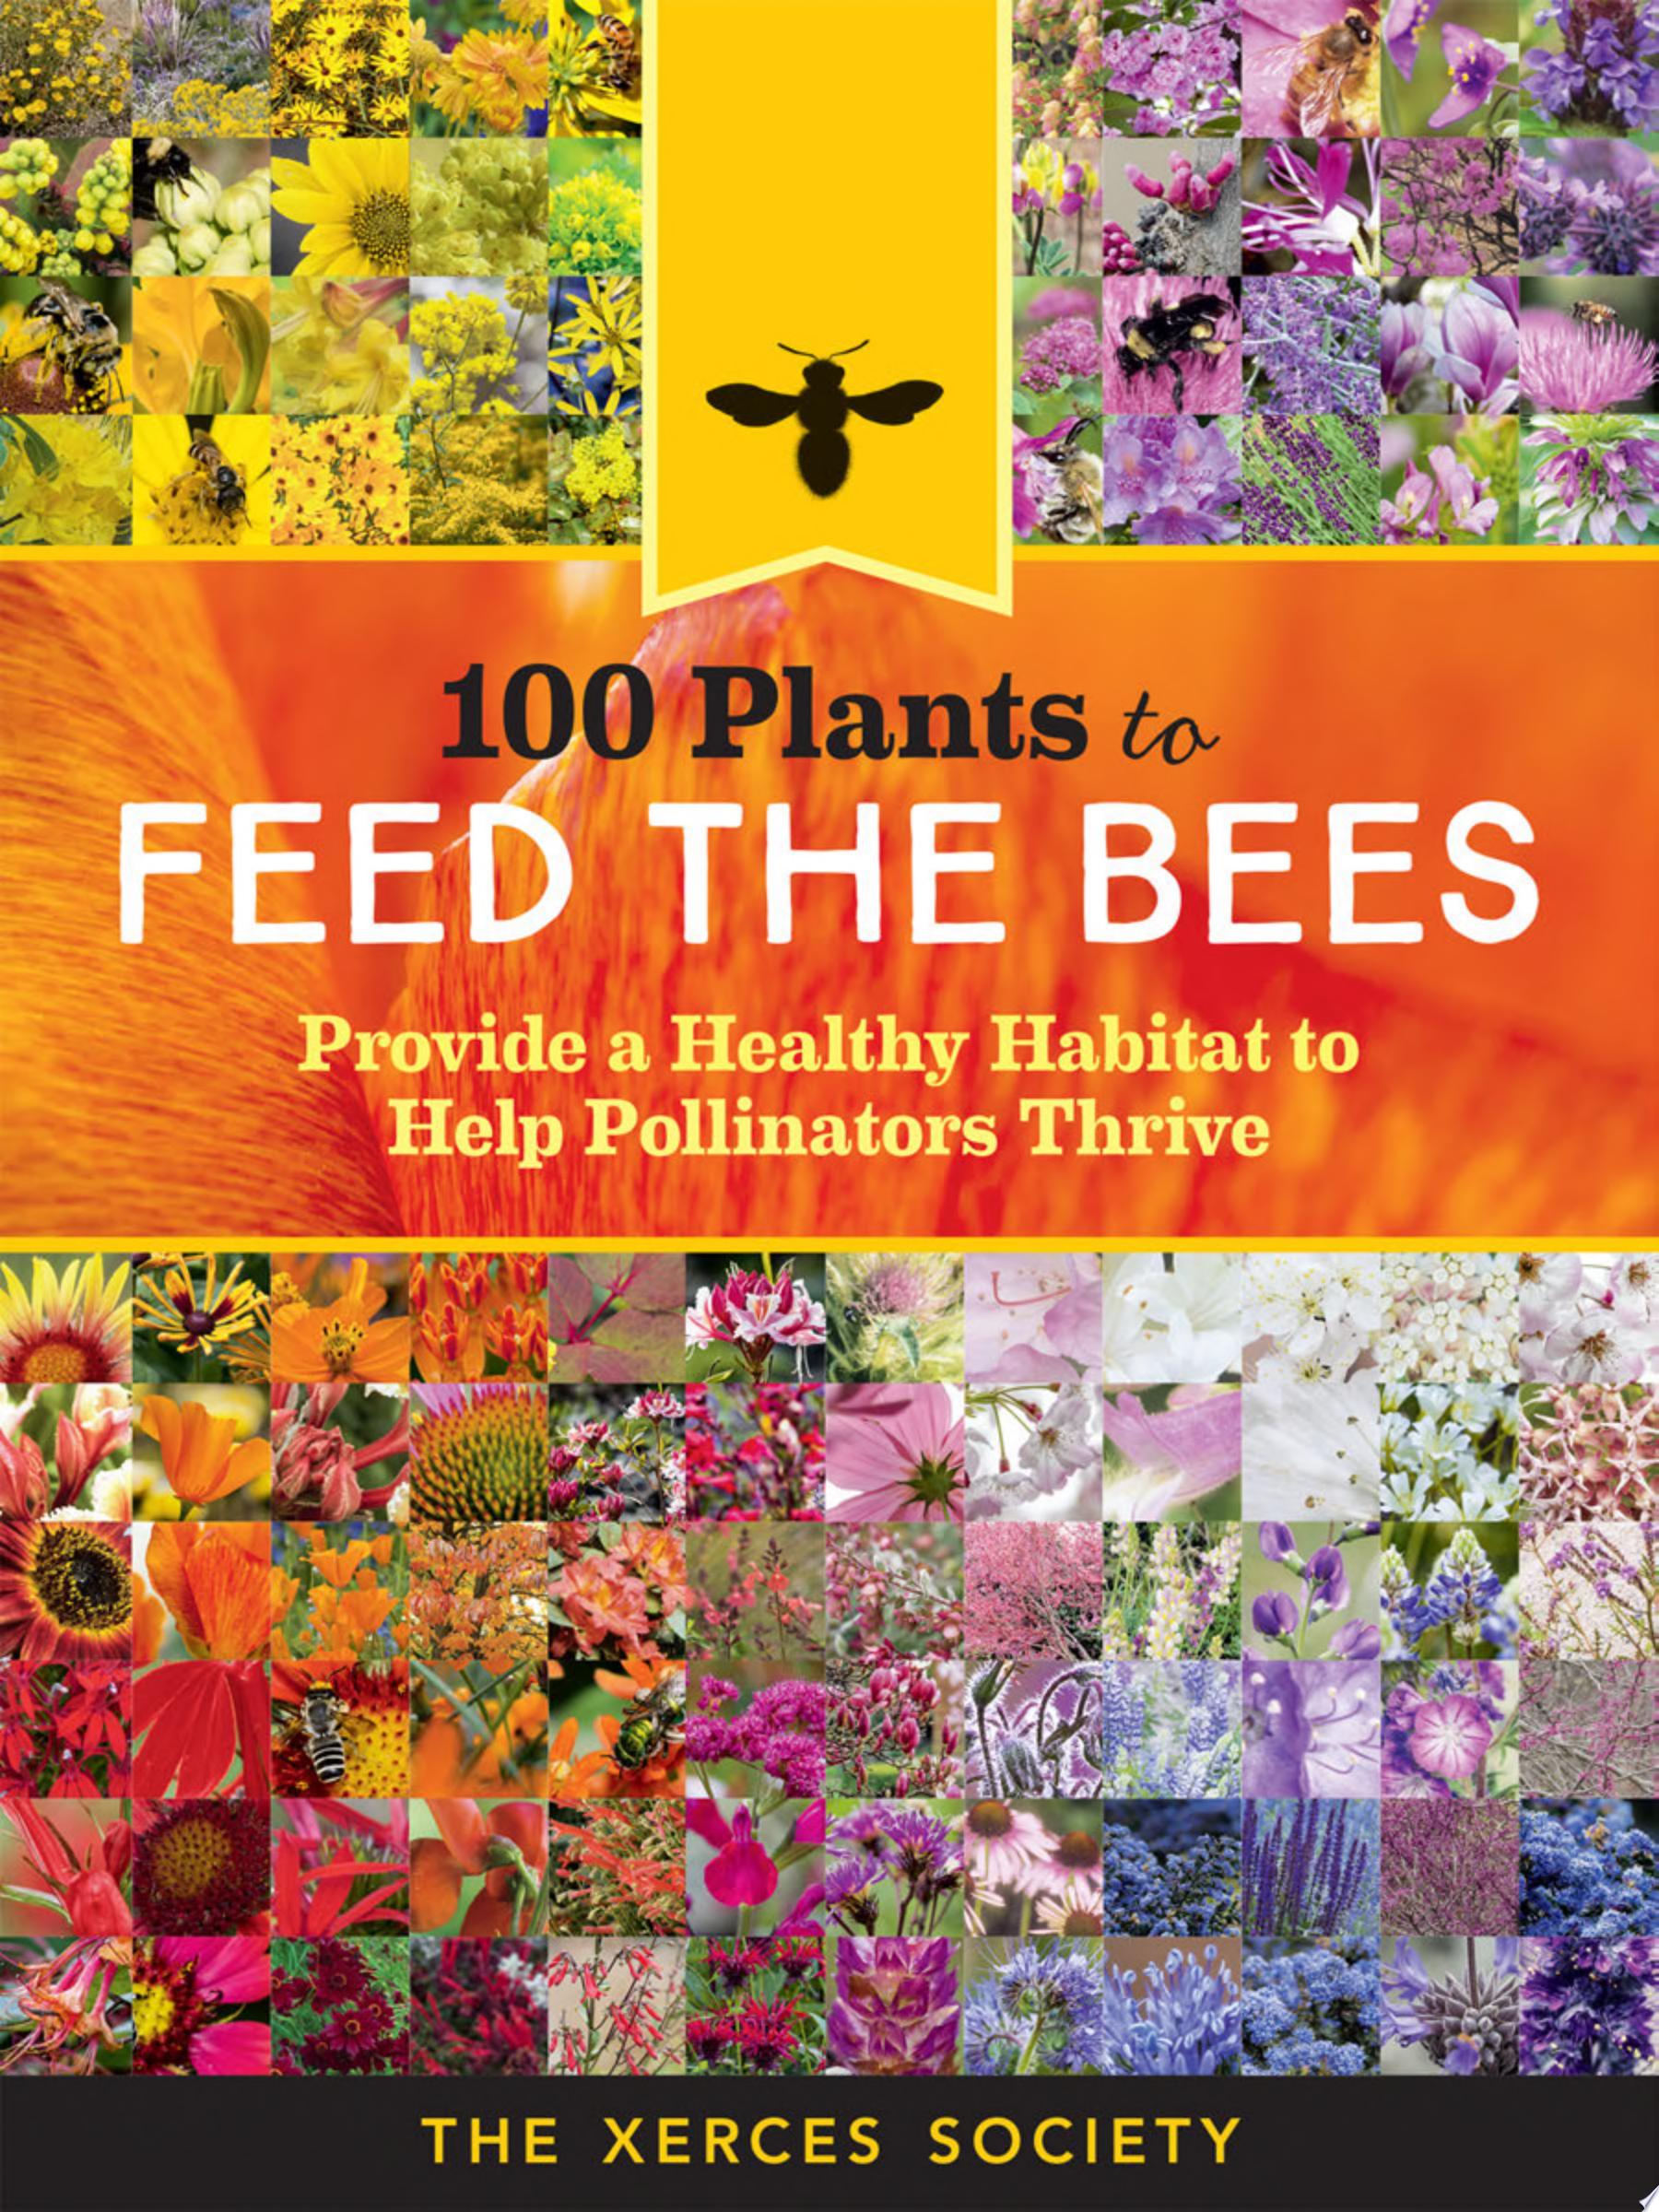 Image for "100 Plants to Feed the Bees"